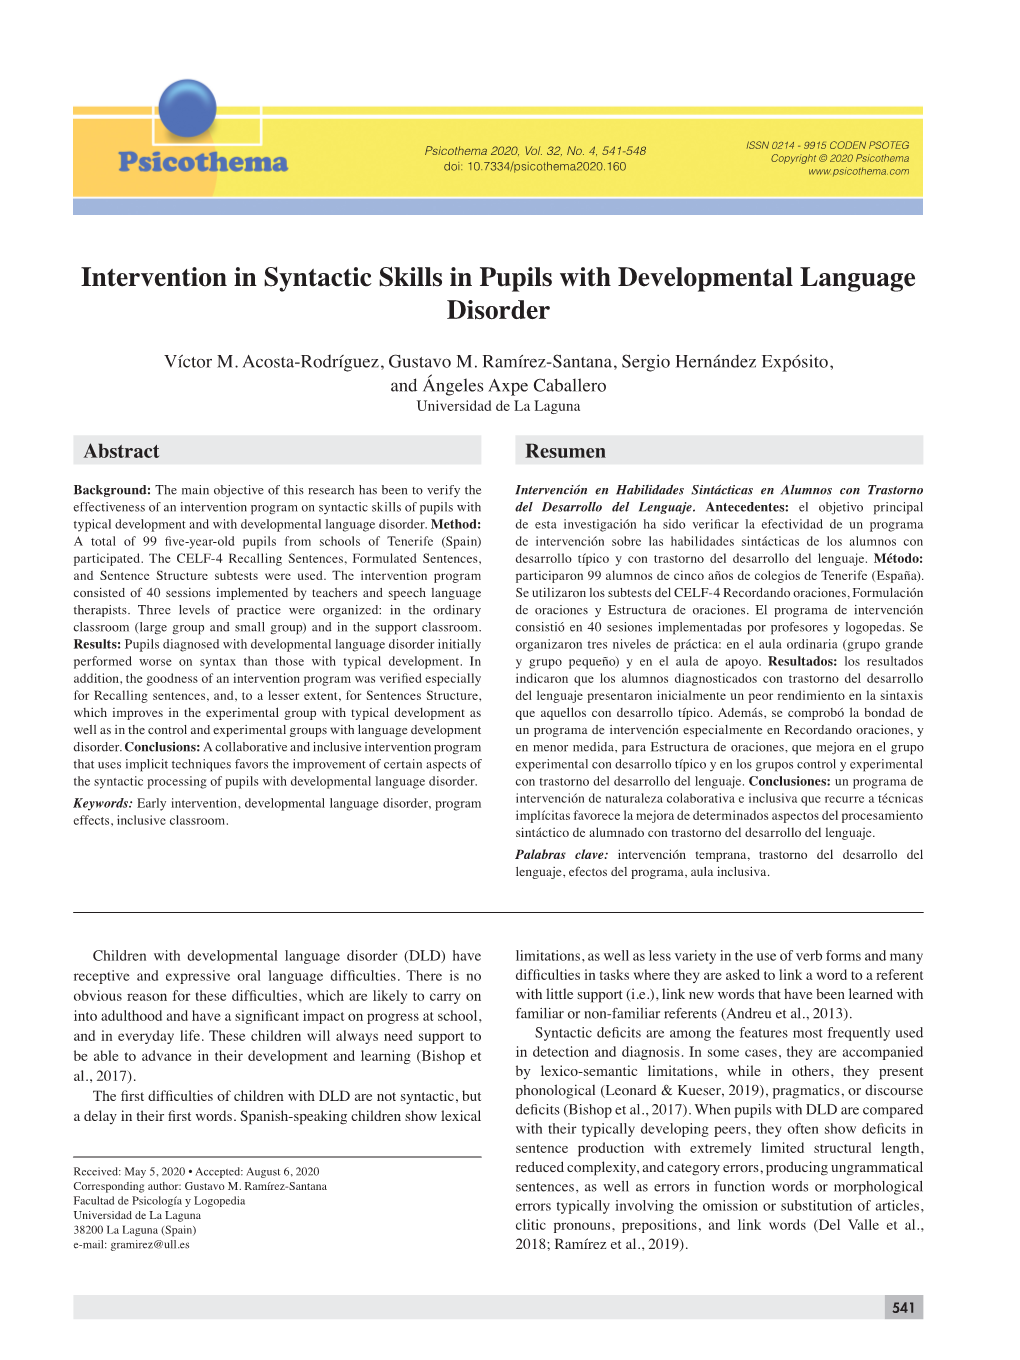 Intervention in Syntactic Skills in Pupils with Developmental Language Disorder